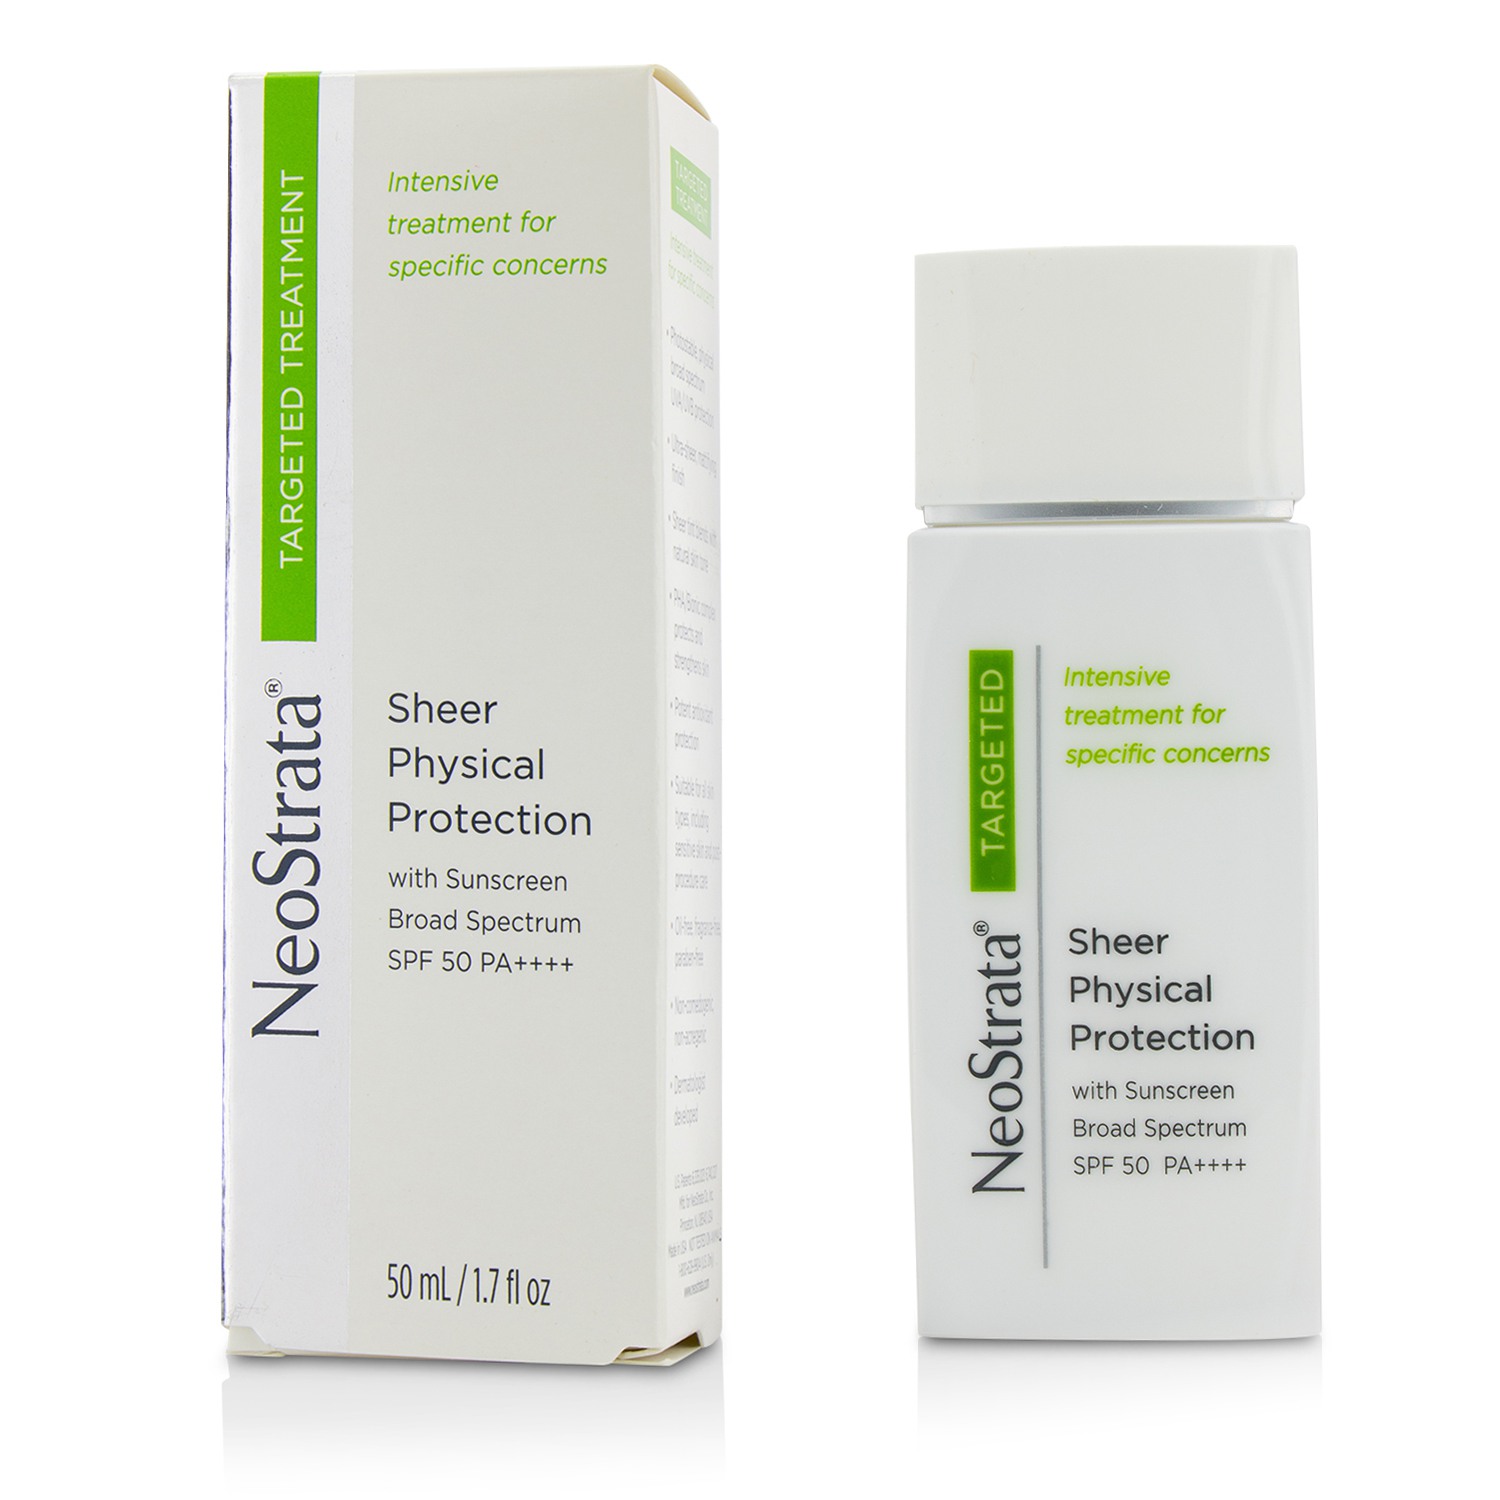 Targeted Treatment Sheer Physical Protection SPF50 PA++++ Neostrata Image